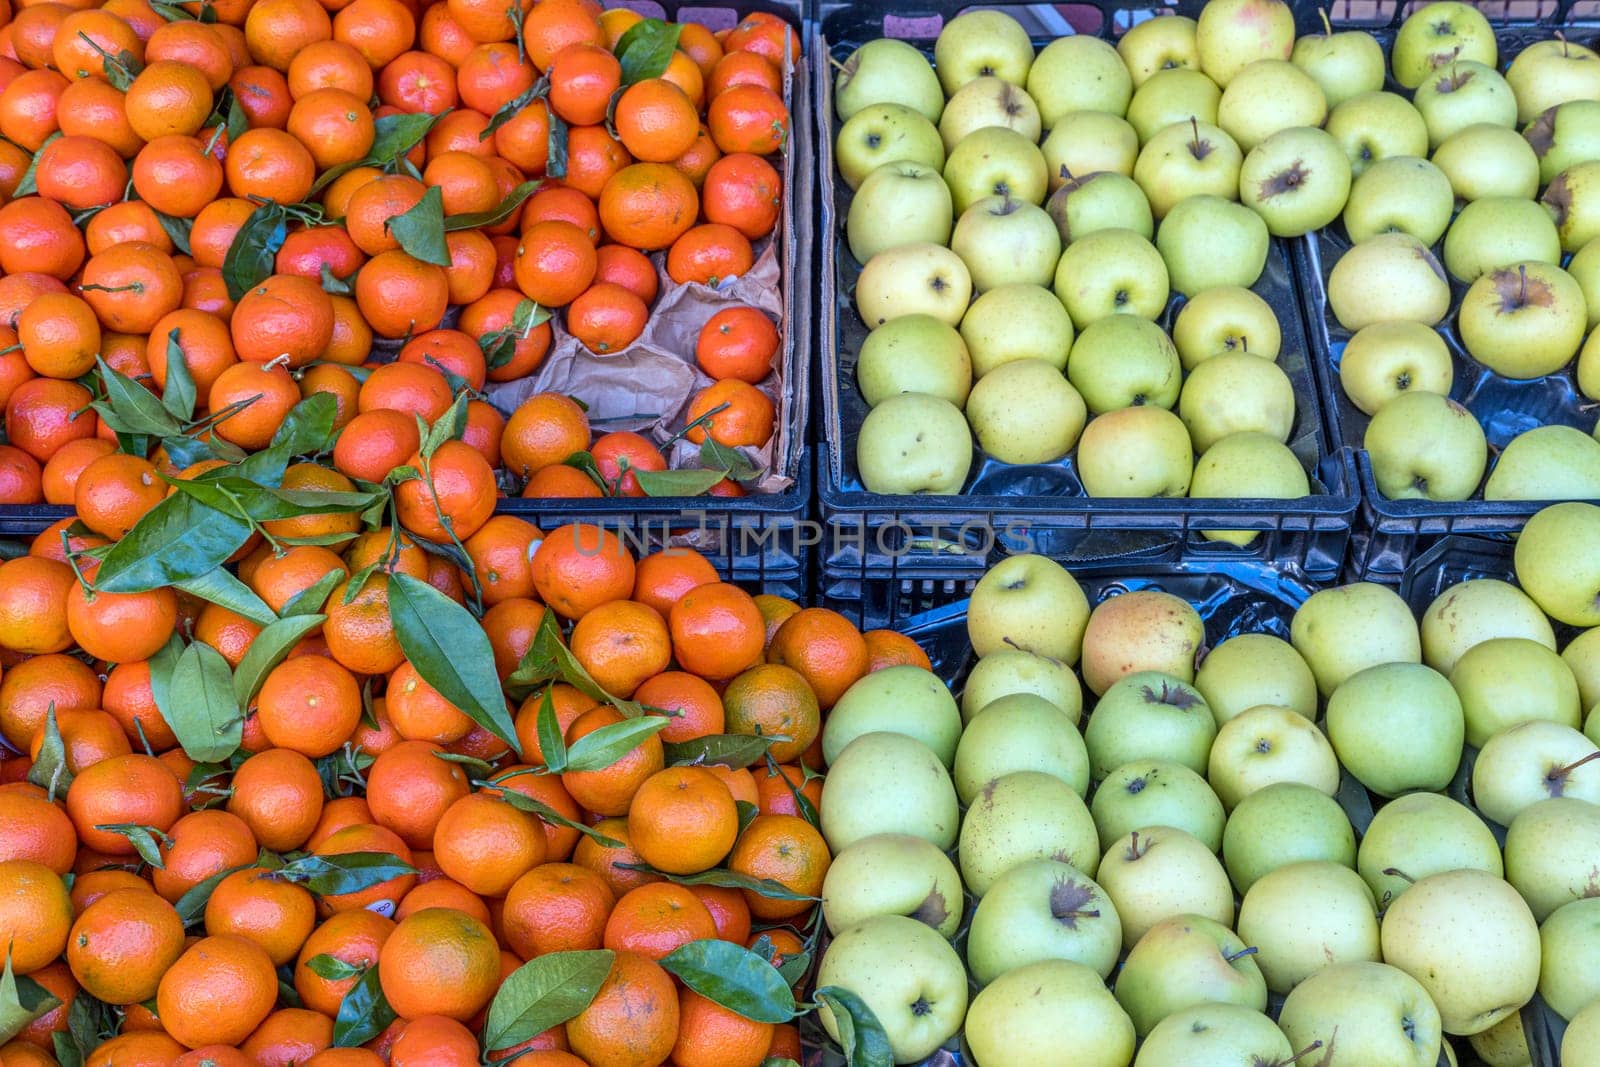 Green apples and tangerines for sale at a market